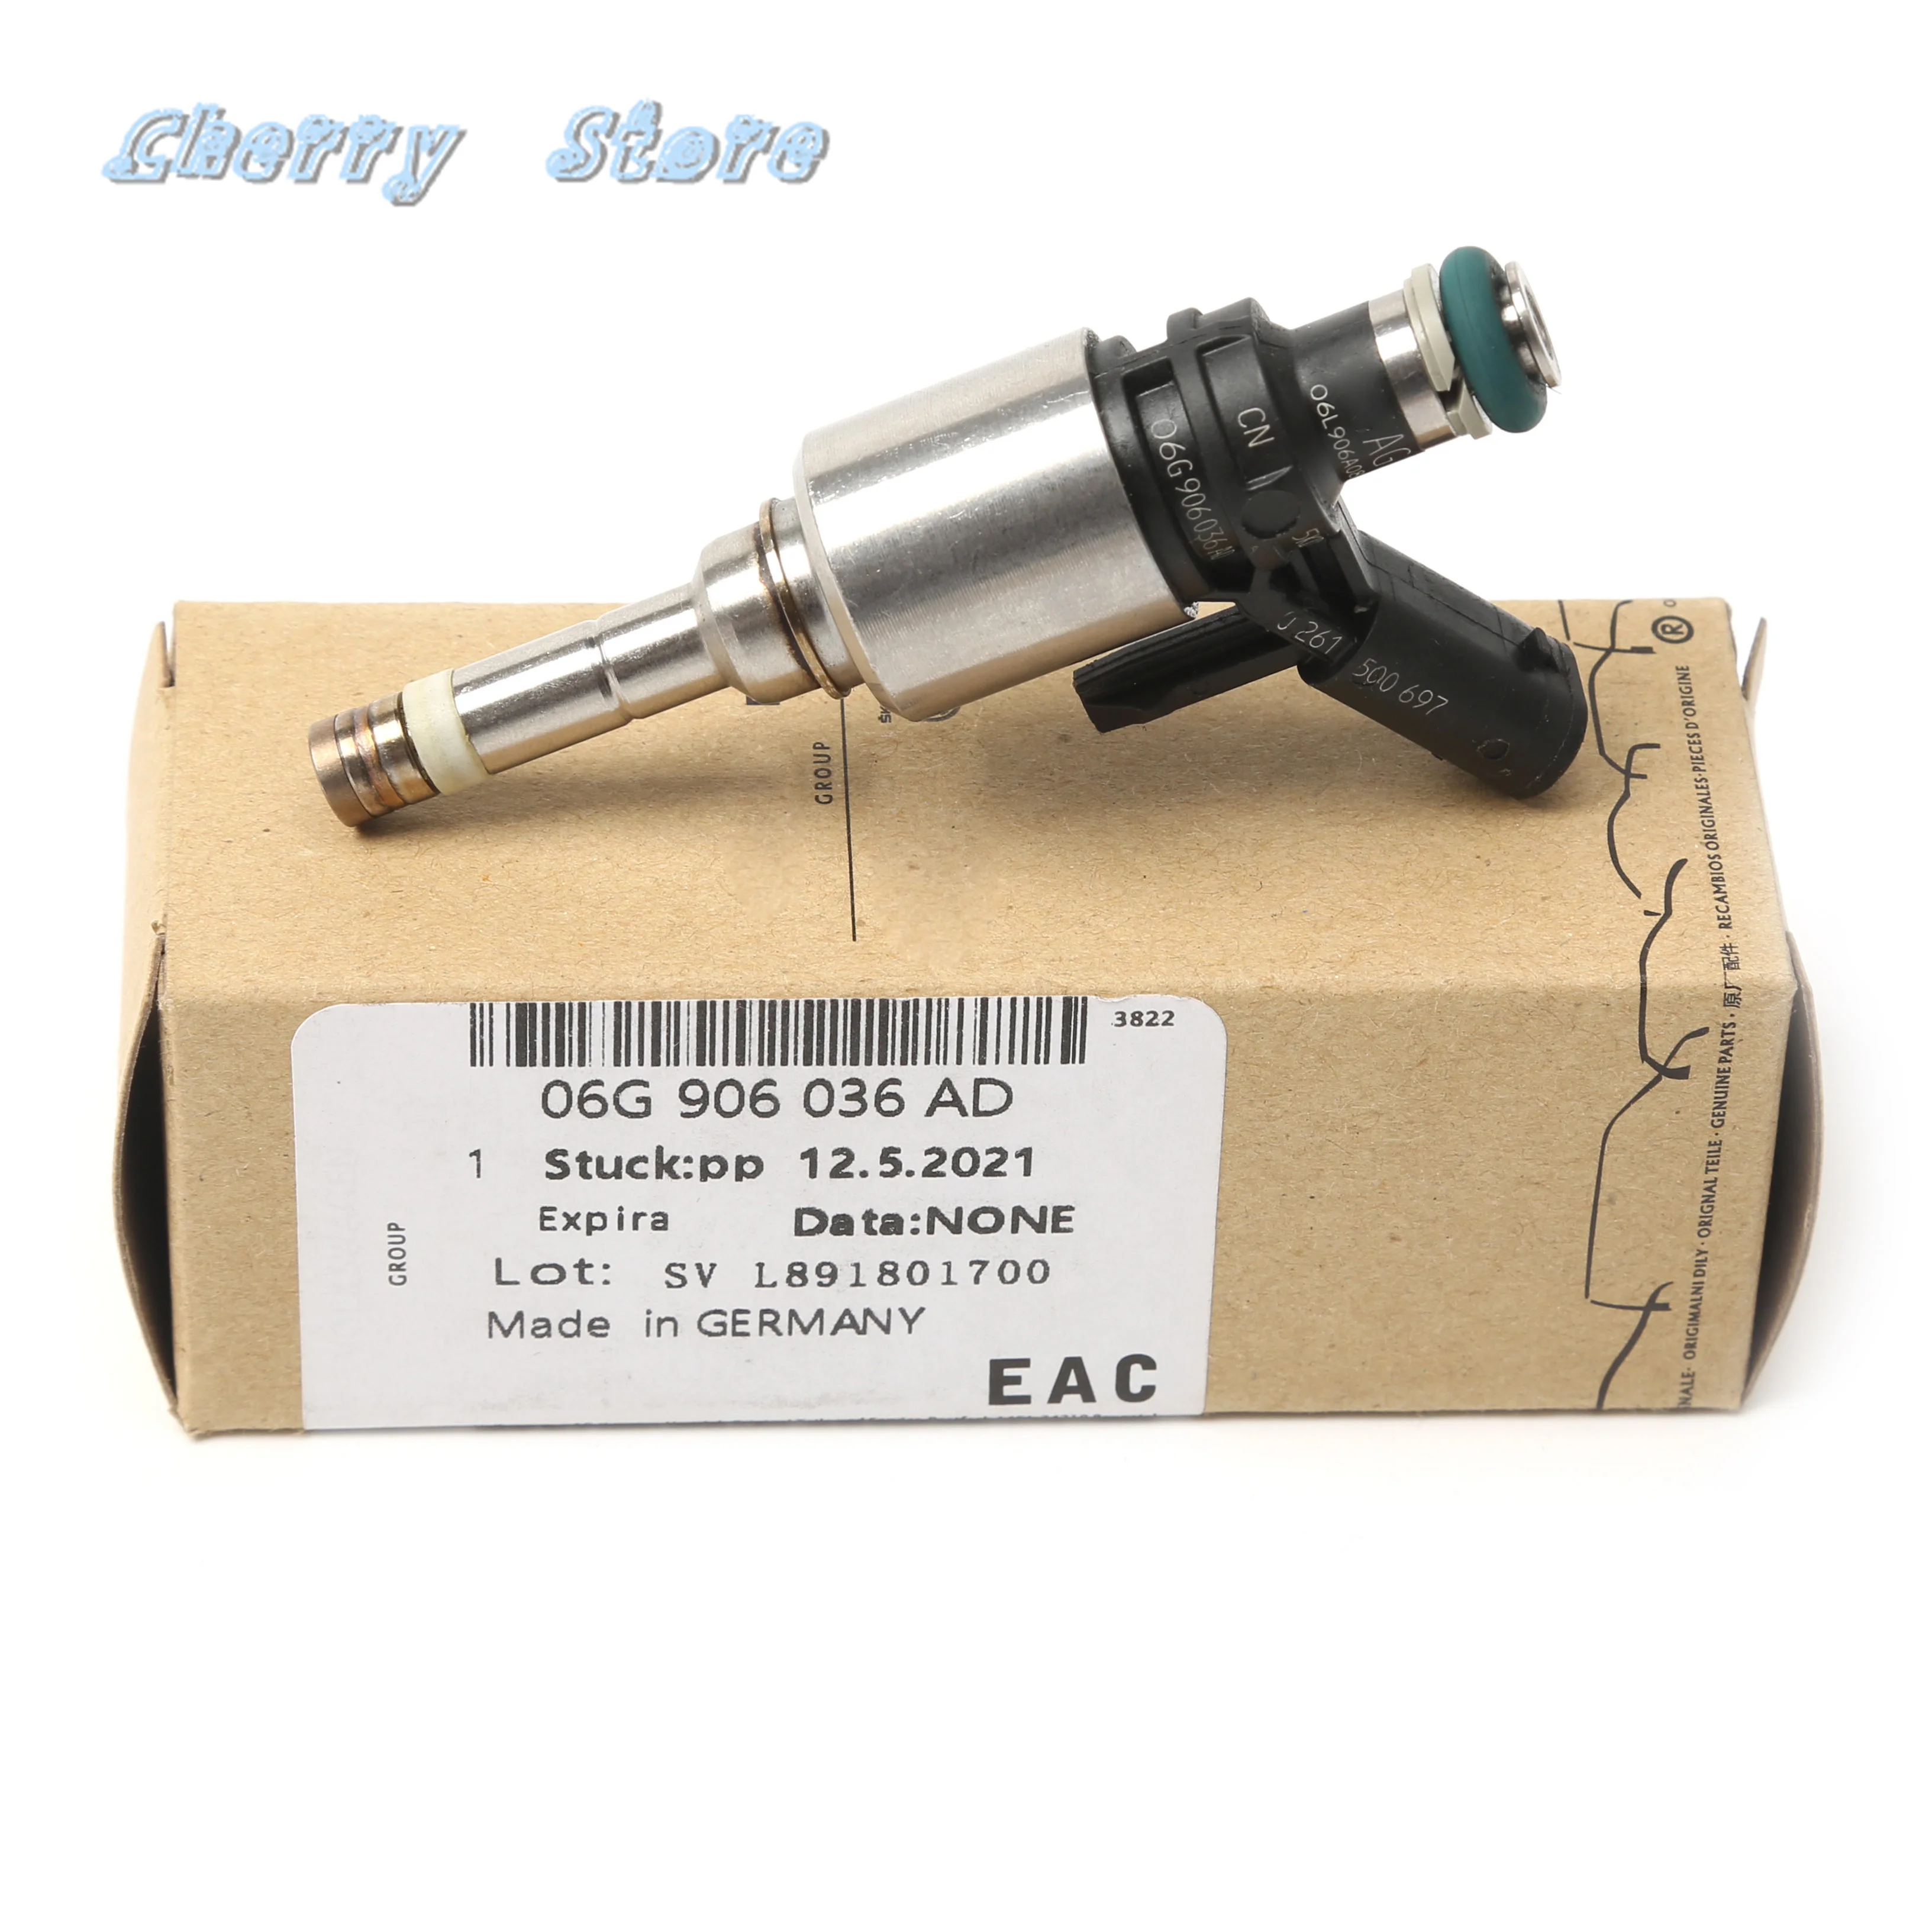 

New Engine Fuel Injector For Audi A3 S3 quattro TT Roadster VW GOLF VII Variant ARTEON 2.0 TSI 4motion H75114246 06G906036AD